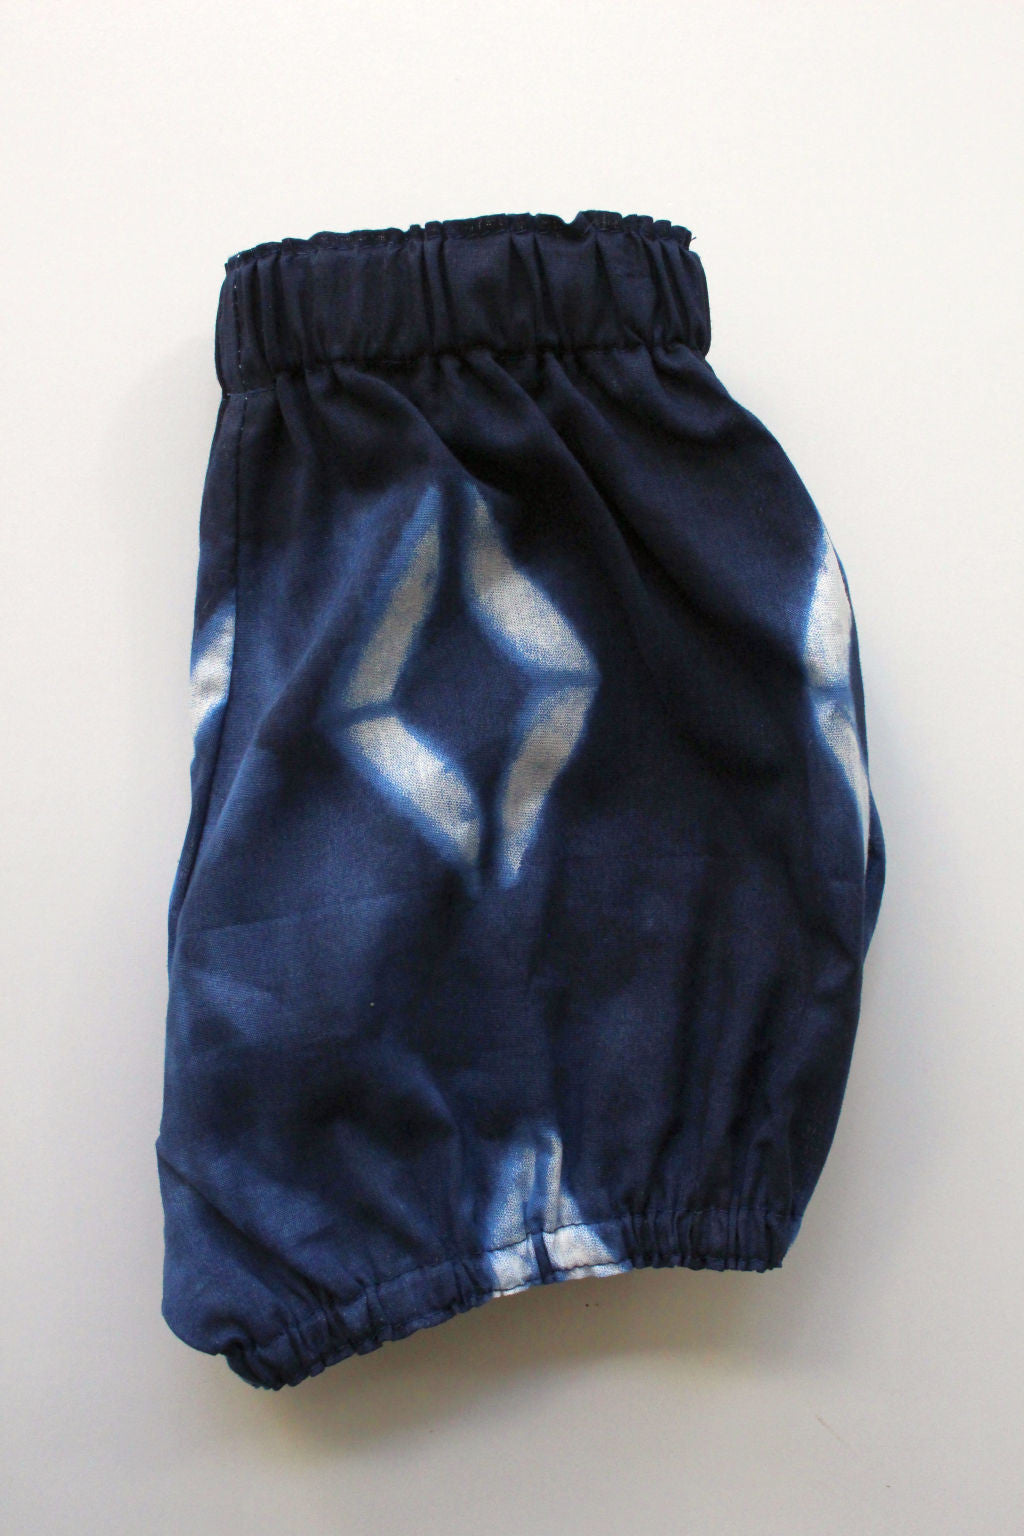 Luxe Bloomers (Limited Edition) - Tie-Dye (Dark)